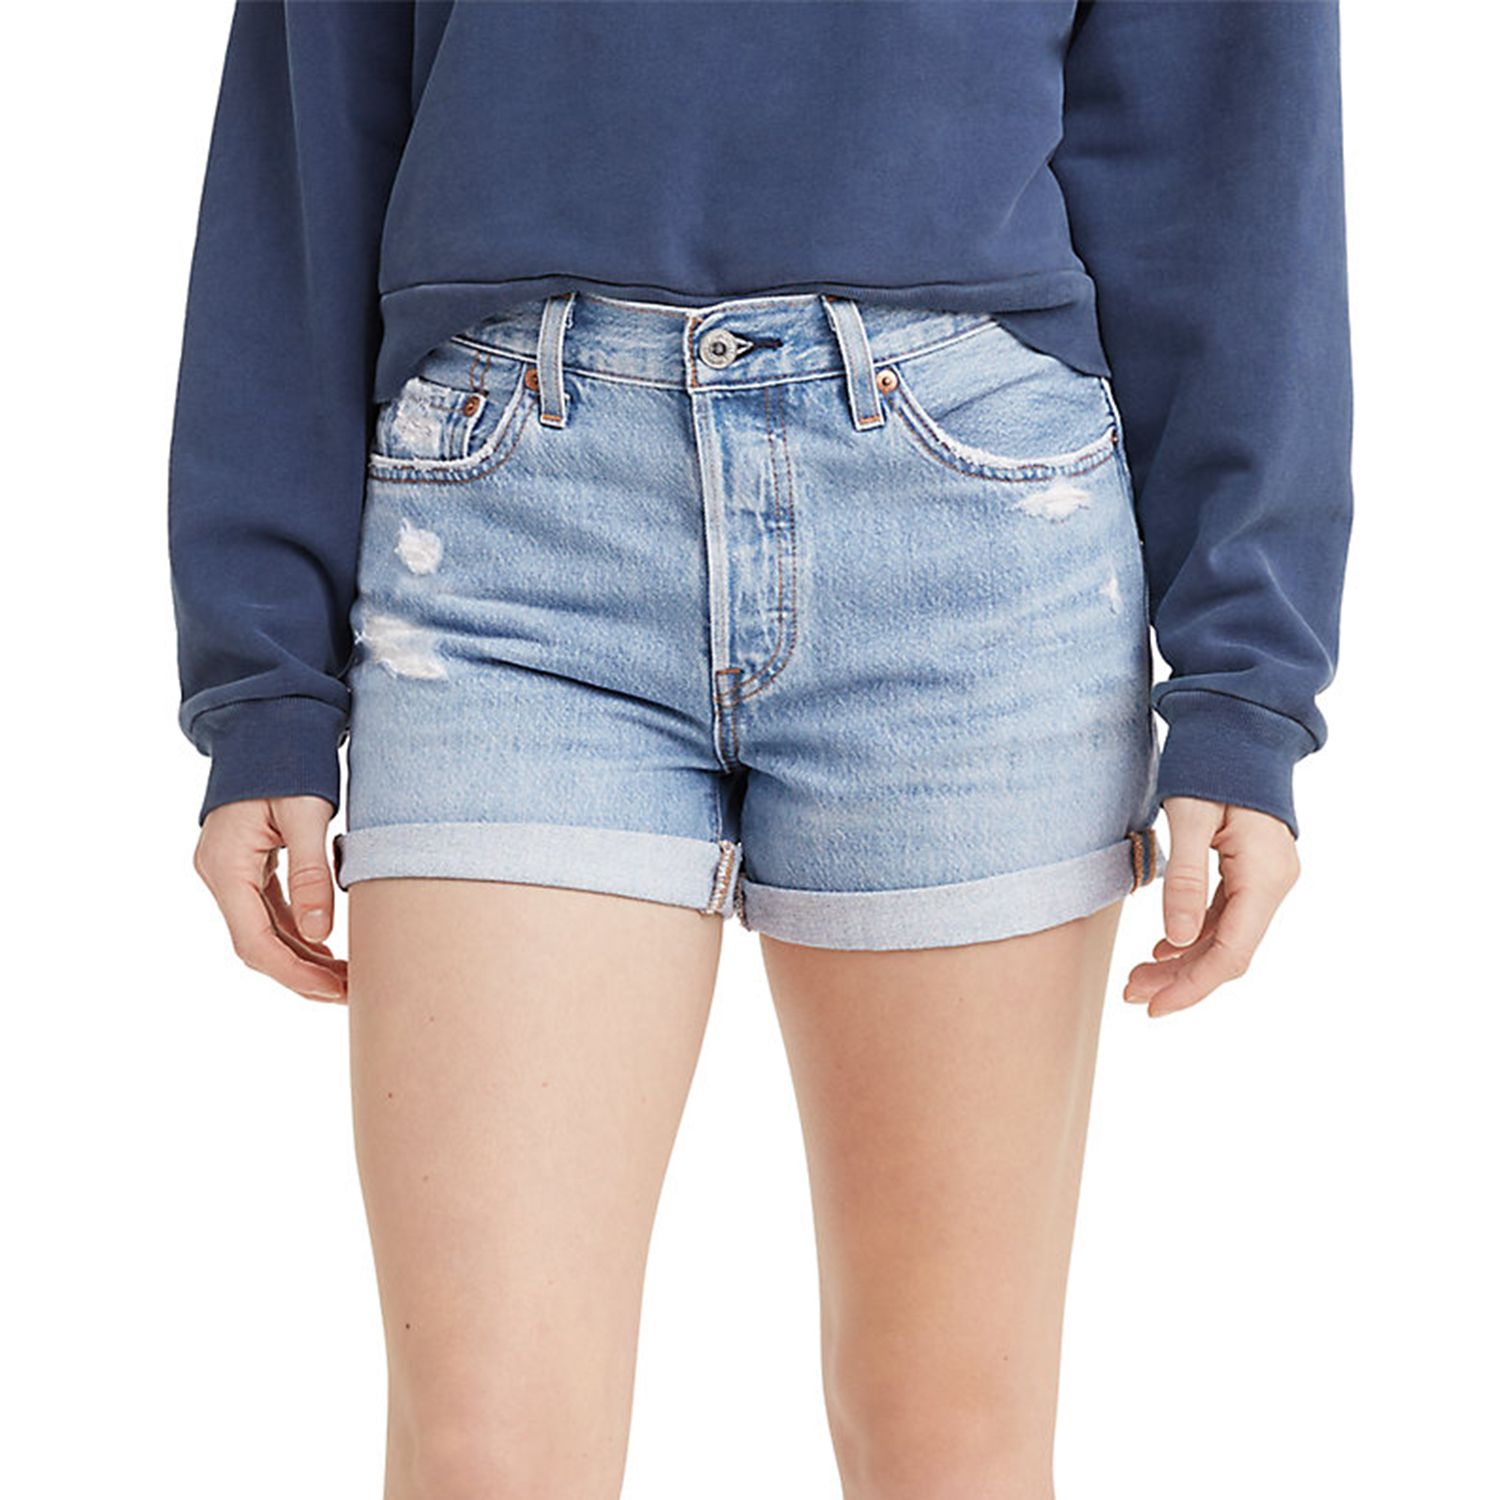 Image for Levi's Women's 501 Original Frayed Jeans Shorts at Kohl's.